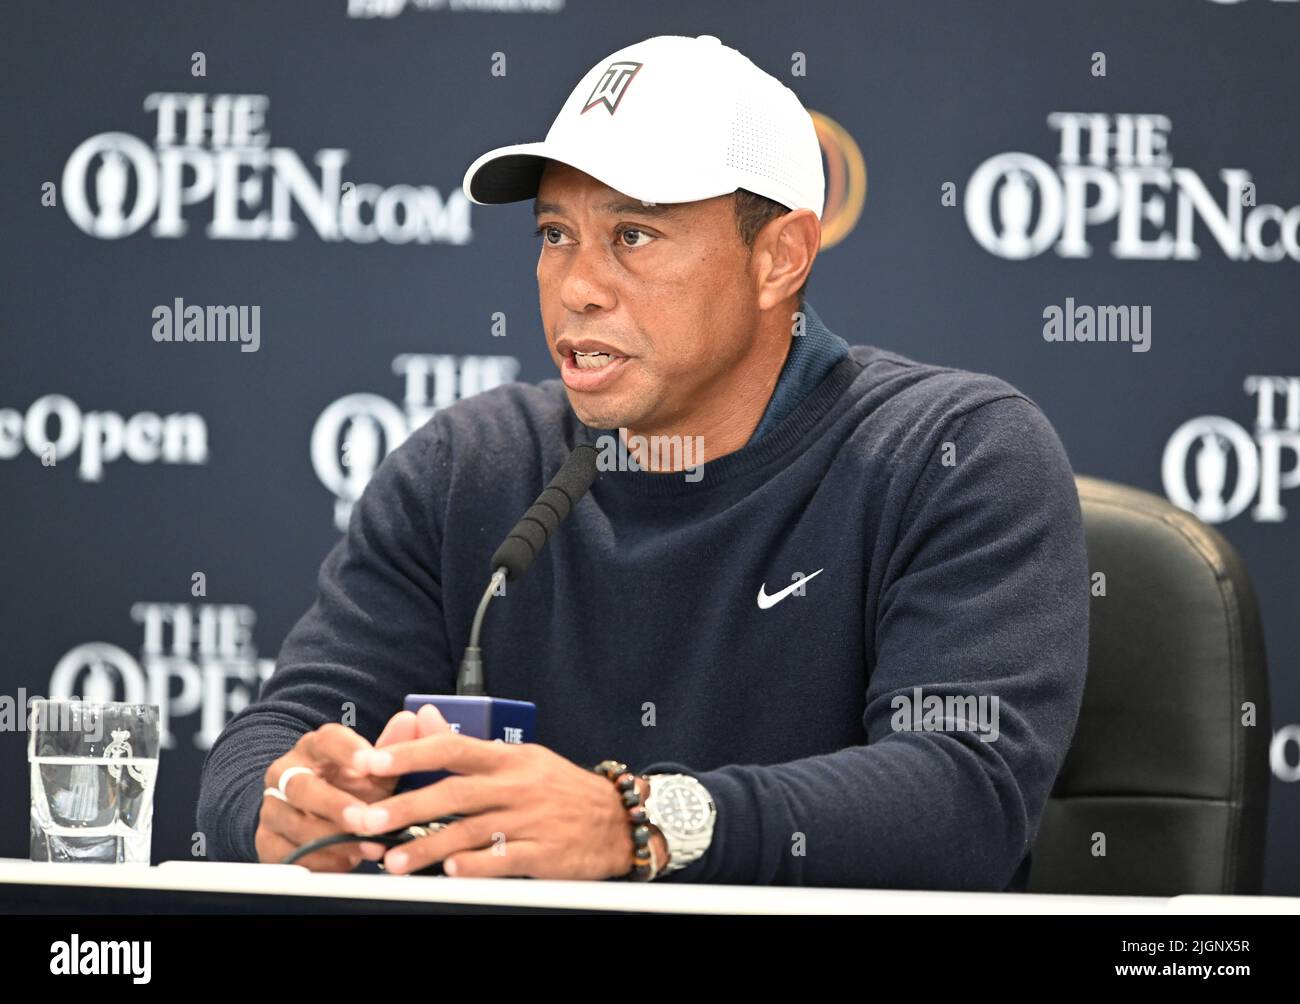 150th Open Golf Championships, St Andrews, July 12th 2022 Tiger Woods speaks to the media during his press conference at the Old Course, St Andrews, Scotland